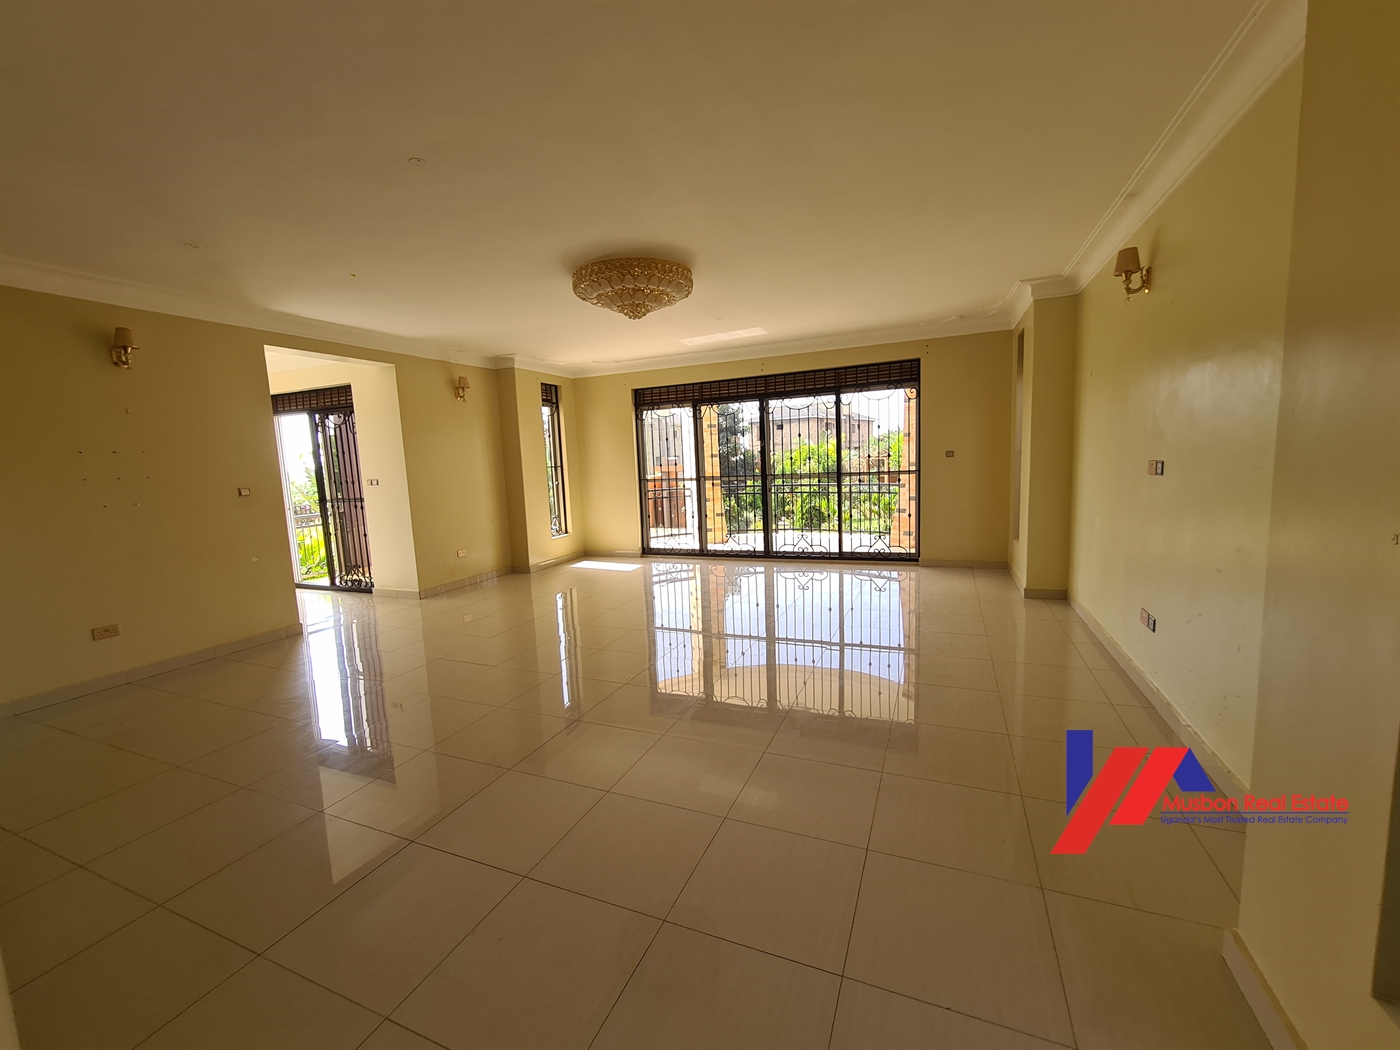 Mansion for sale in Luzira Kampala